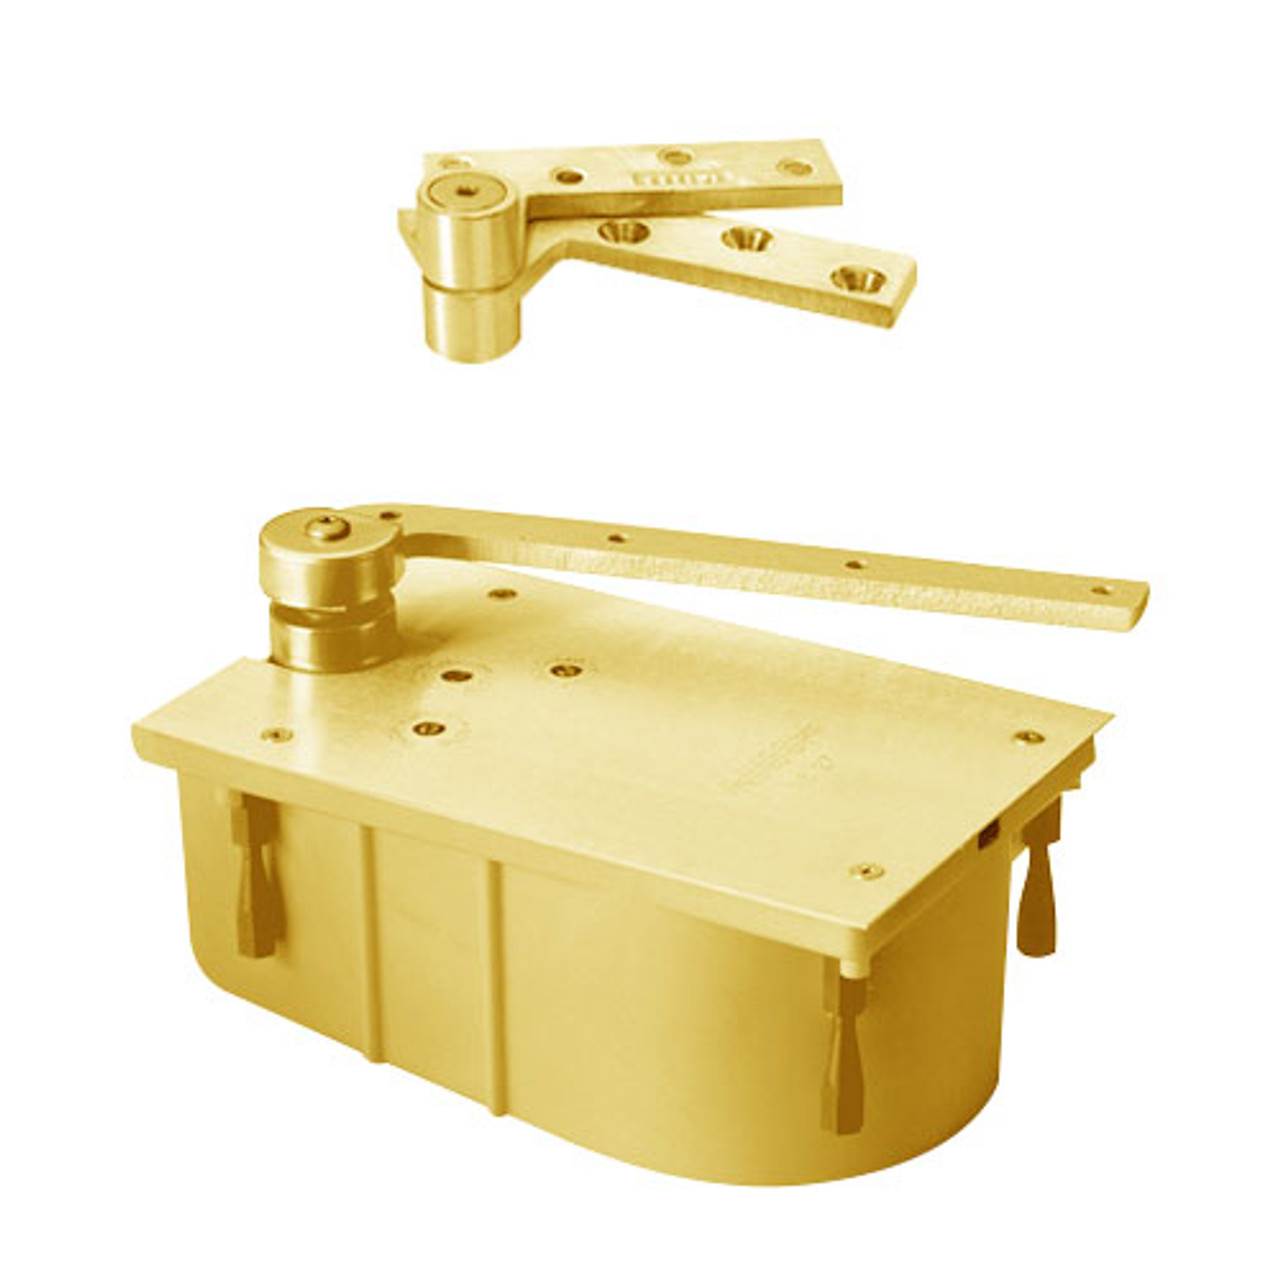 127-85S-CWF-LH-605 Rixson 27 Series Heavy Duty 3/4" Offset Hung Floor Closer in Bright Brass Finish